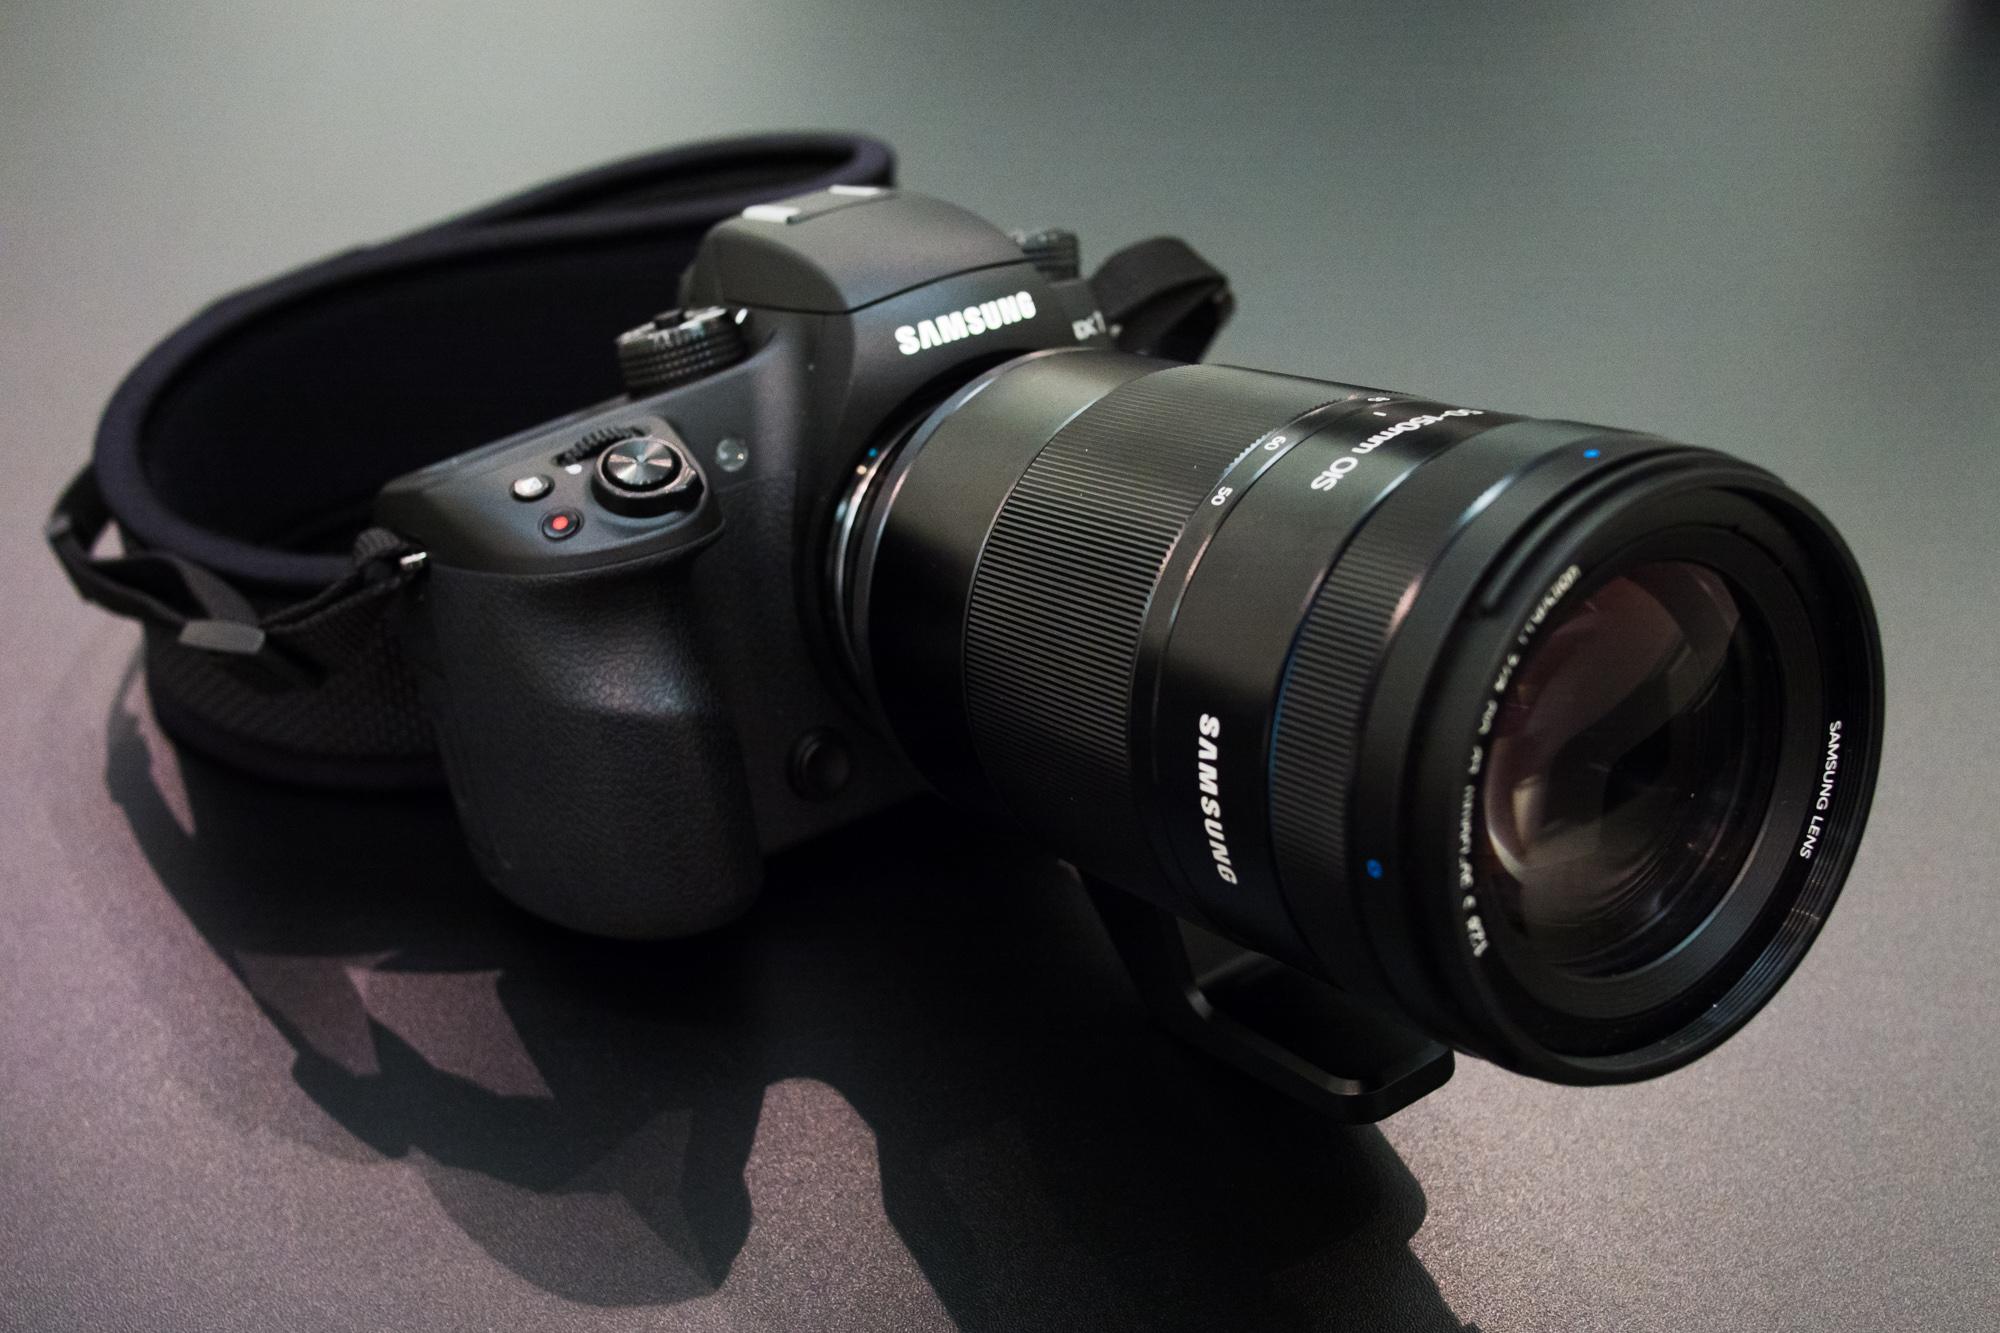 samsungs nx1 4k shooting beast puts mirrorless competition shame samsung with 50 150 front